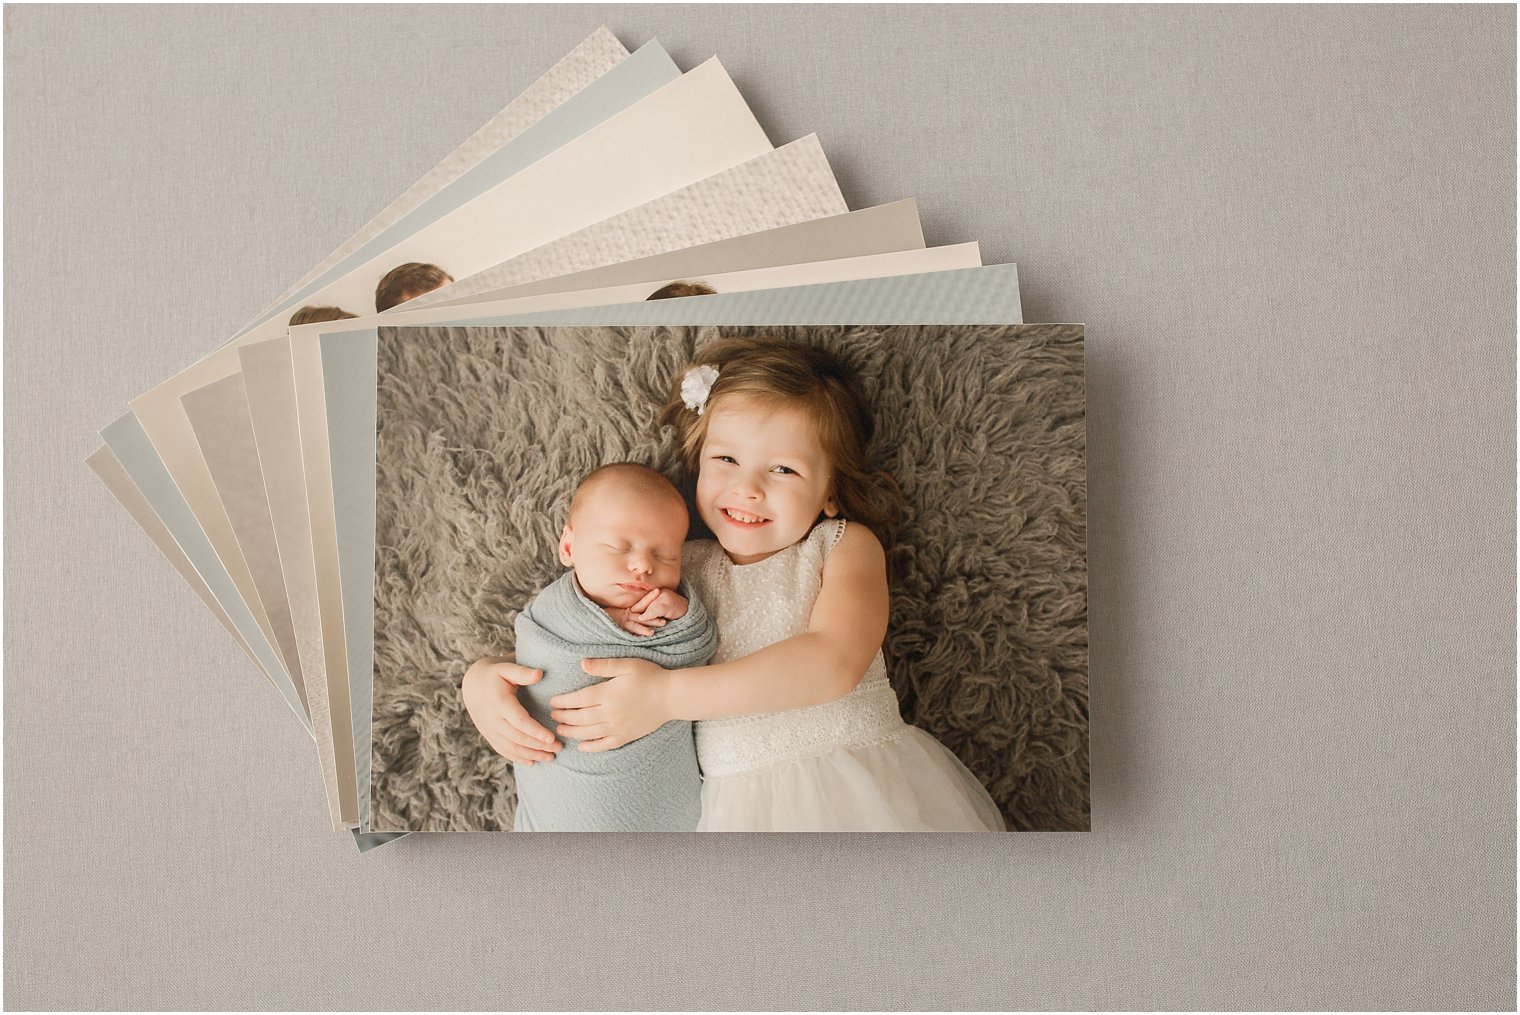 Displaying Newborn Photos in Your Home | Mounted Prints